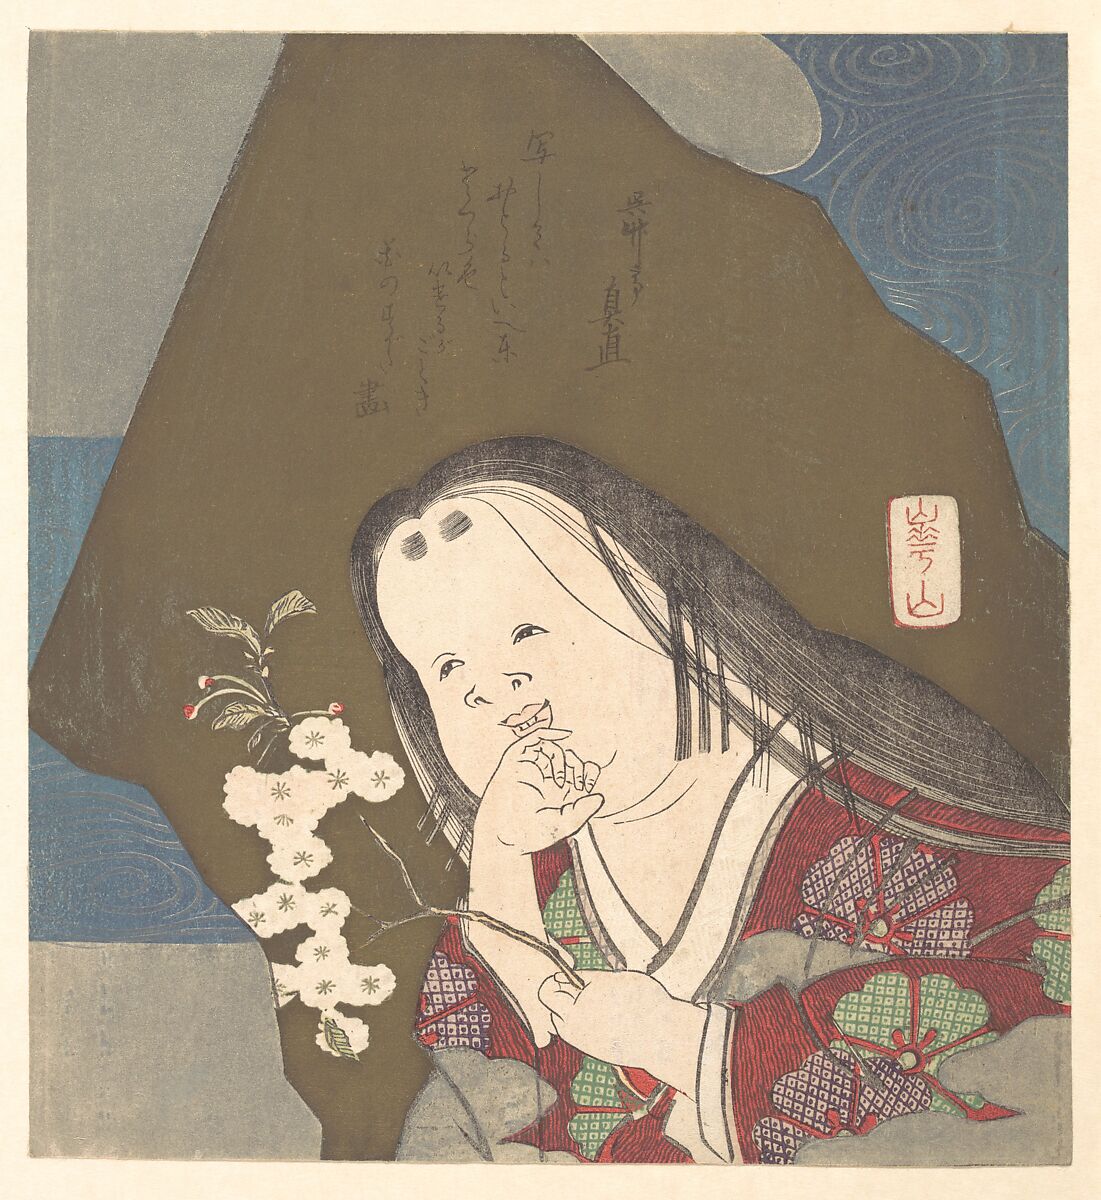 Otafuku Holding a Branch of Double White Cherry Blossoms, Watanabe Kazan (Japanese, died 1841), Woodblock print (surimono); ink and color on paper, Japan 